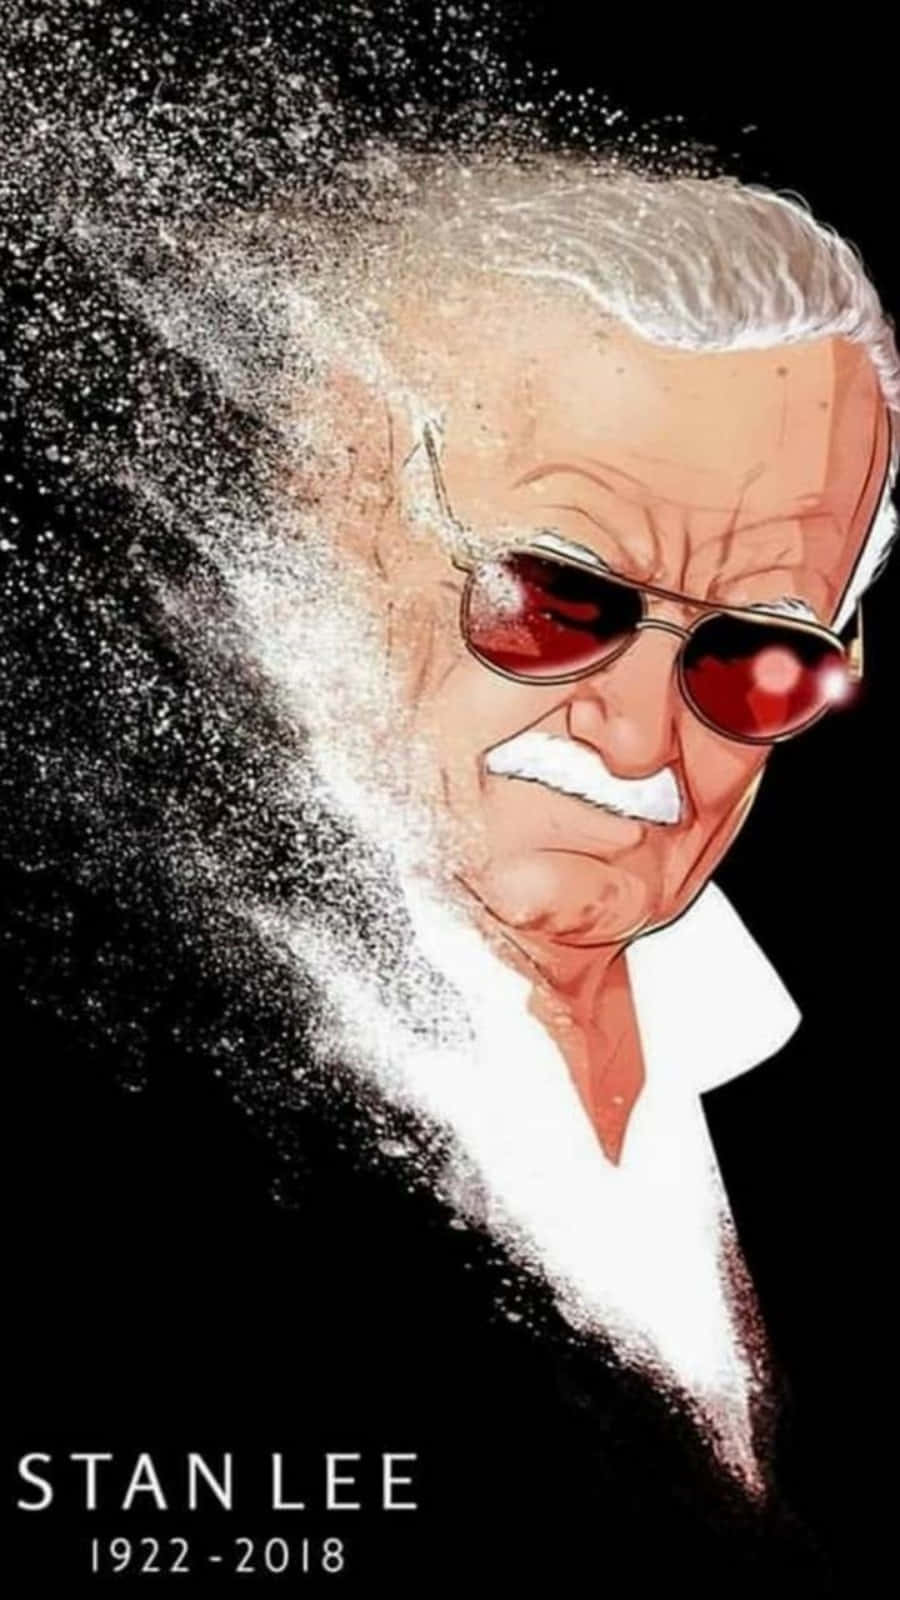 A Salute to Stan Lee - Tribute Image Wallpaper